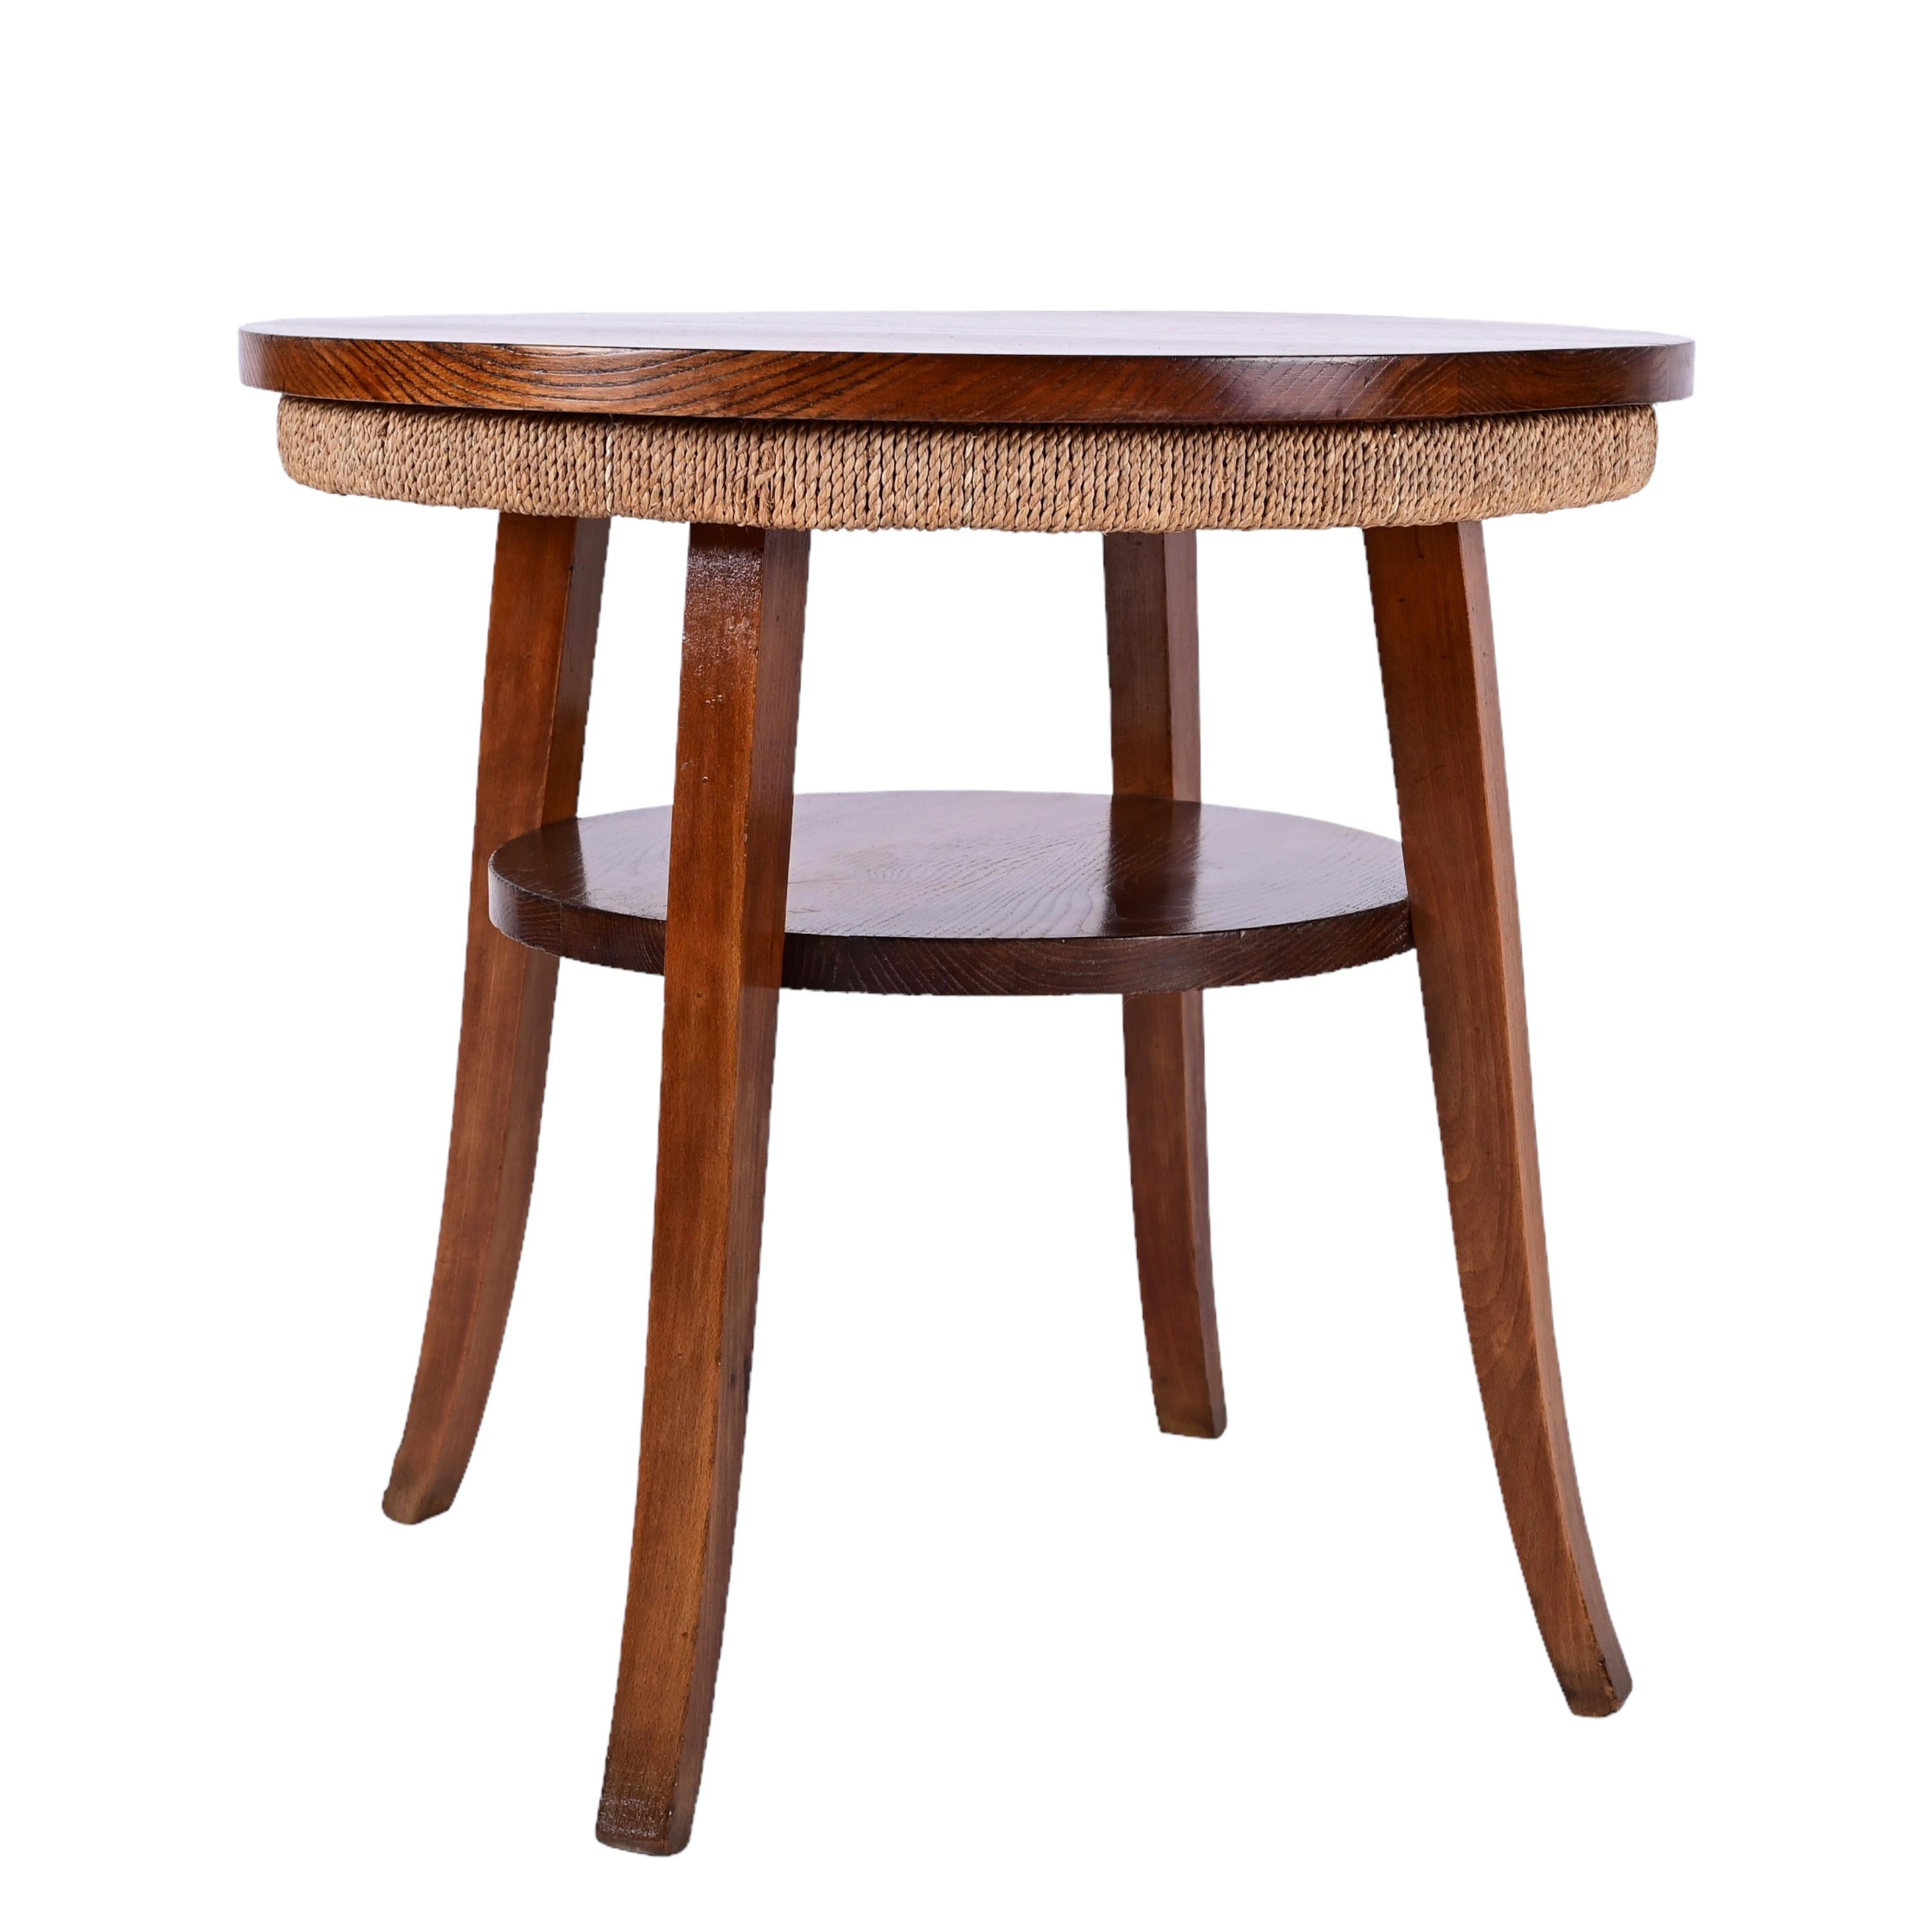 Midcentury Two-Tier Round Rope and Chestnut Wood Italian Coffee Table, 1950s For Sale 1